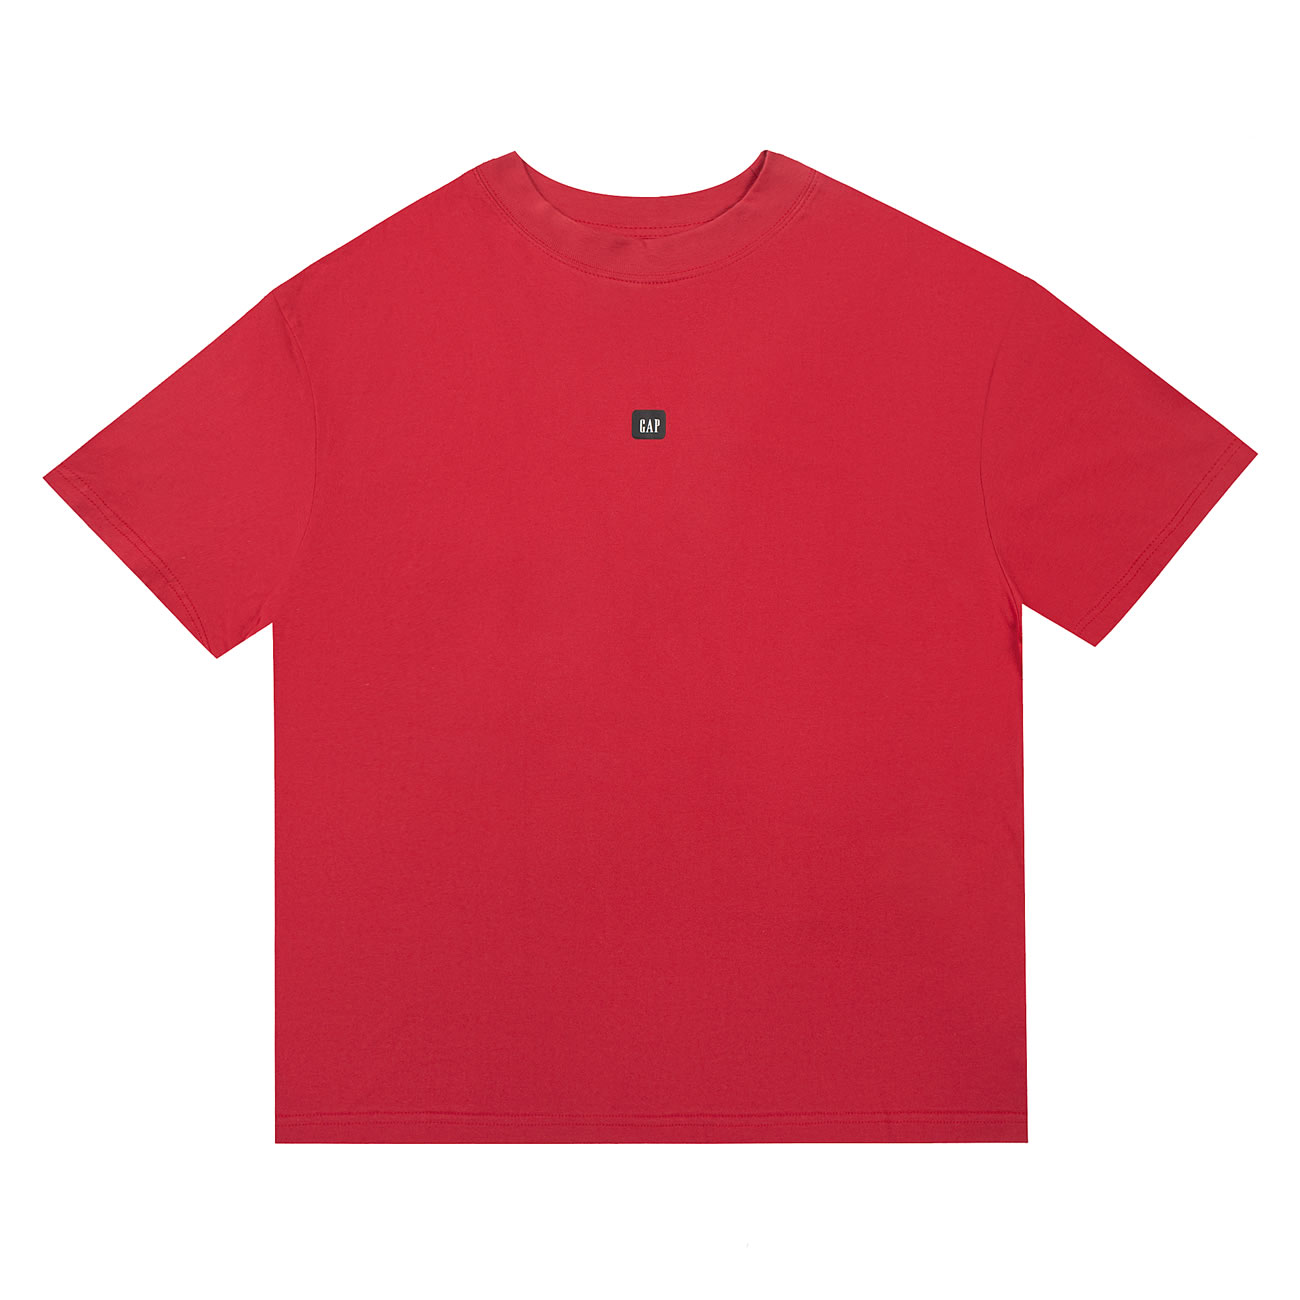 Kanye New T Shirts For Sale Red (1) - newkick.org